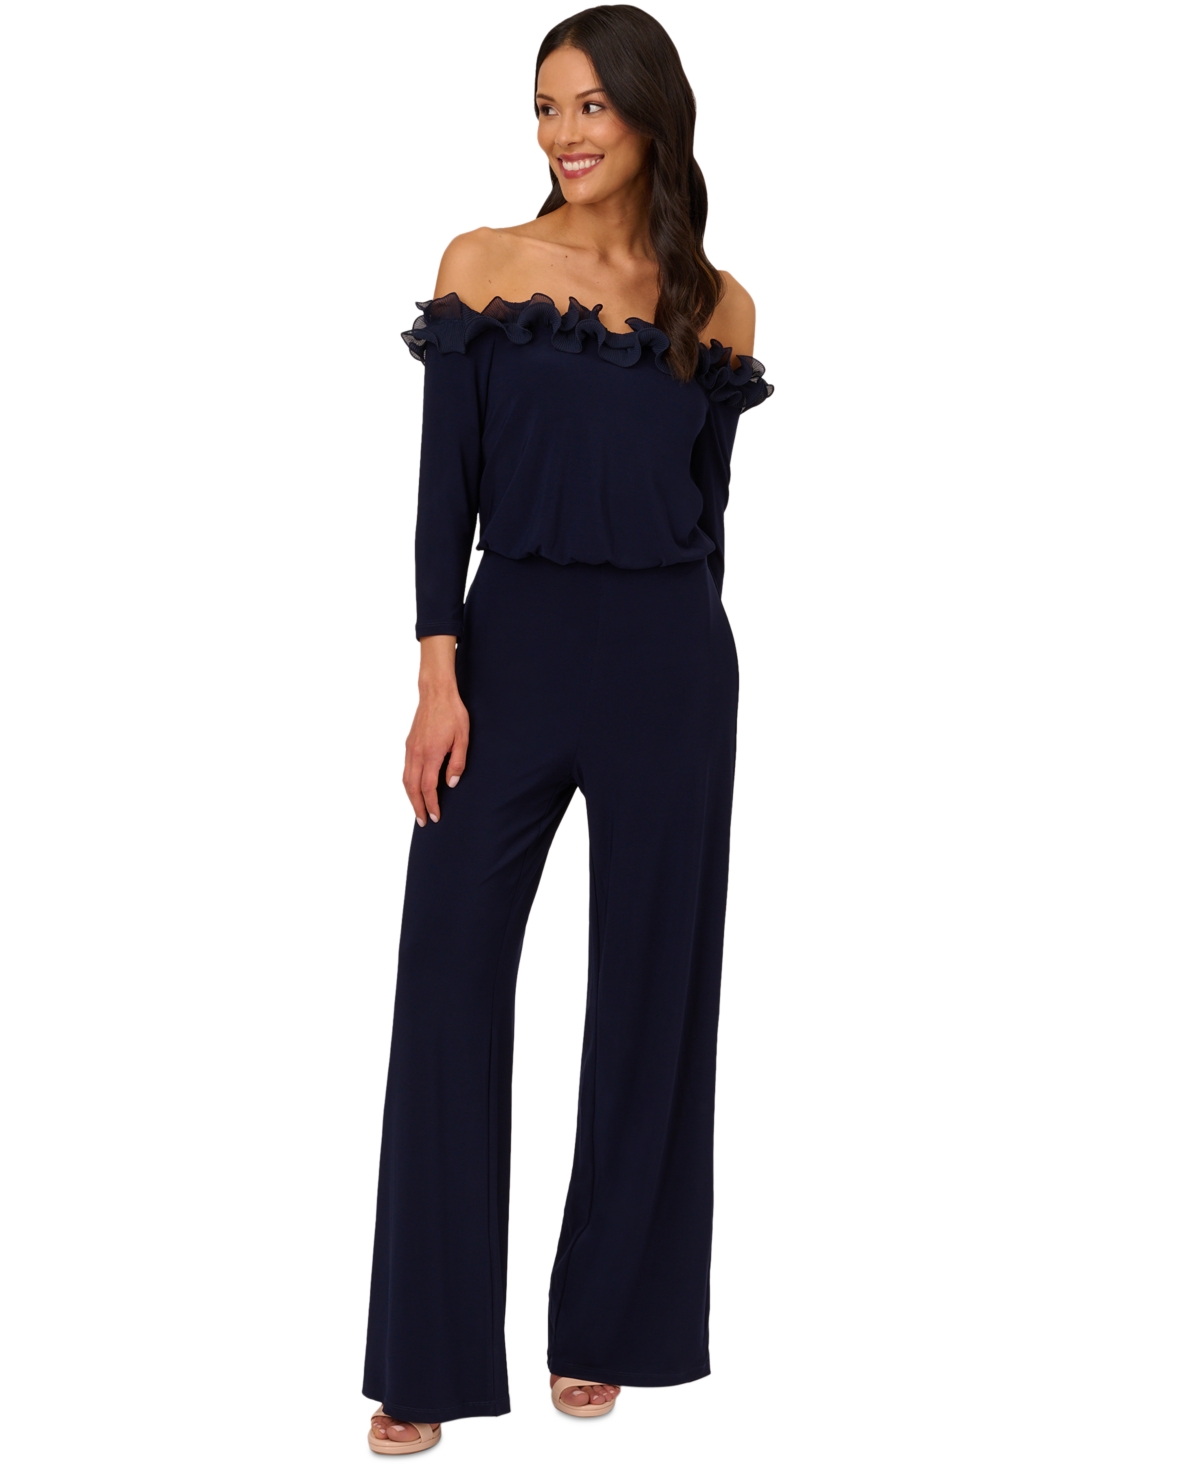 Ruffled Off-The-Shoulder Jumpsuit - Navy